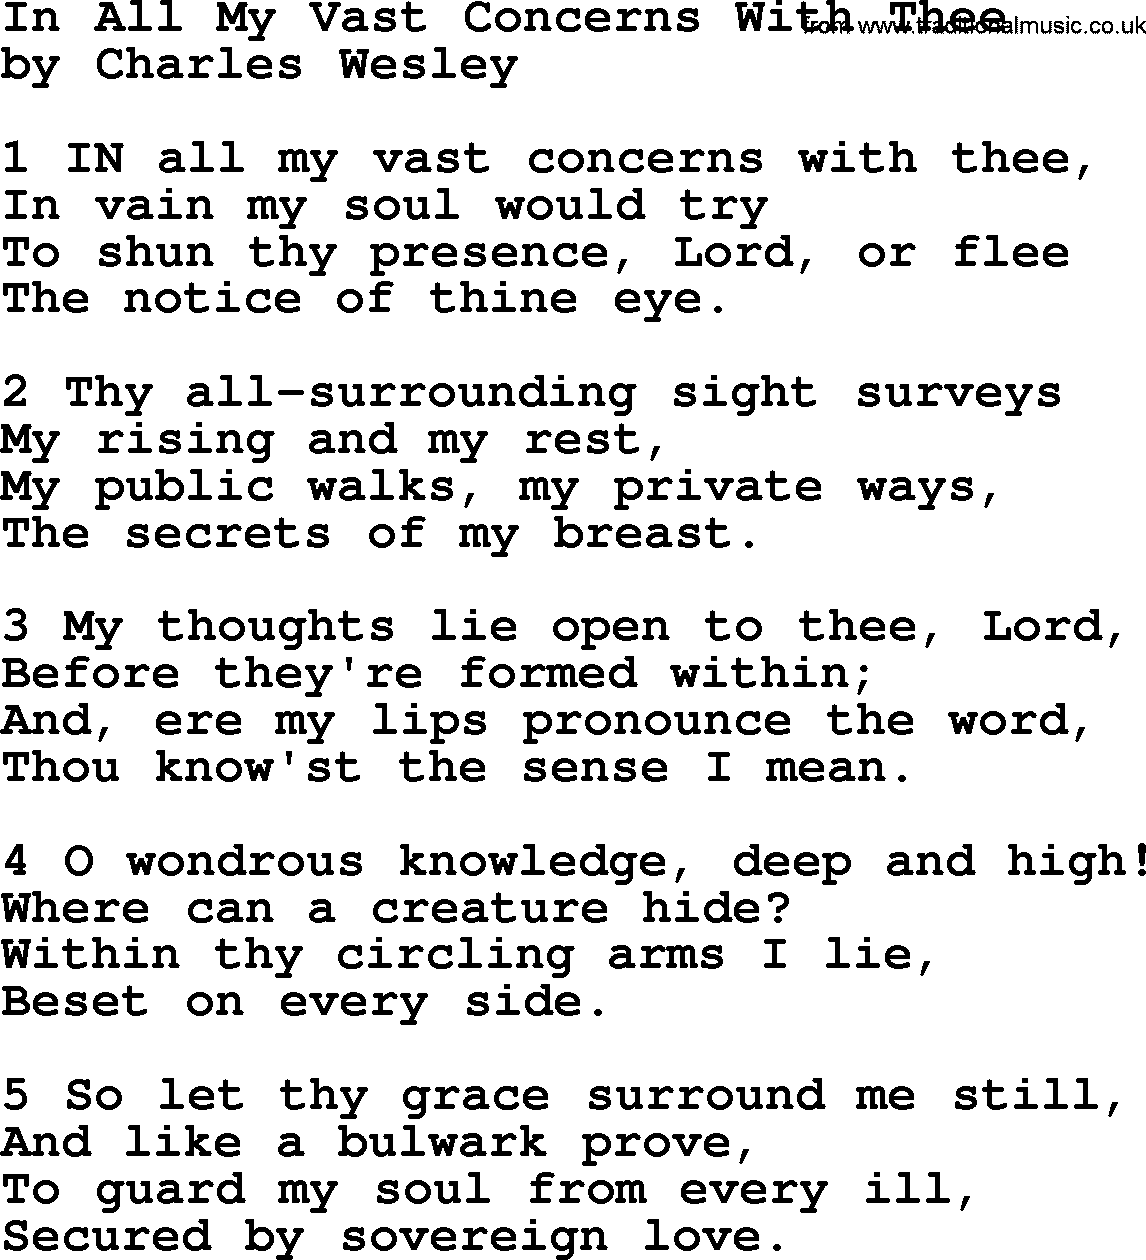 Charles Wesley hymn: In All My Vast Concerns With Thee, lyrics